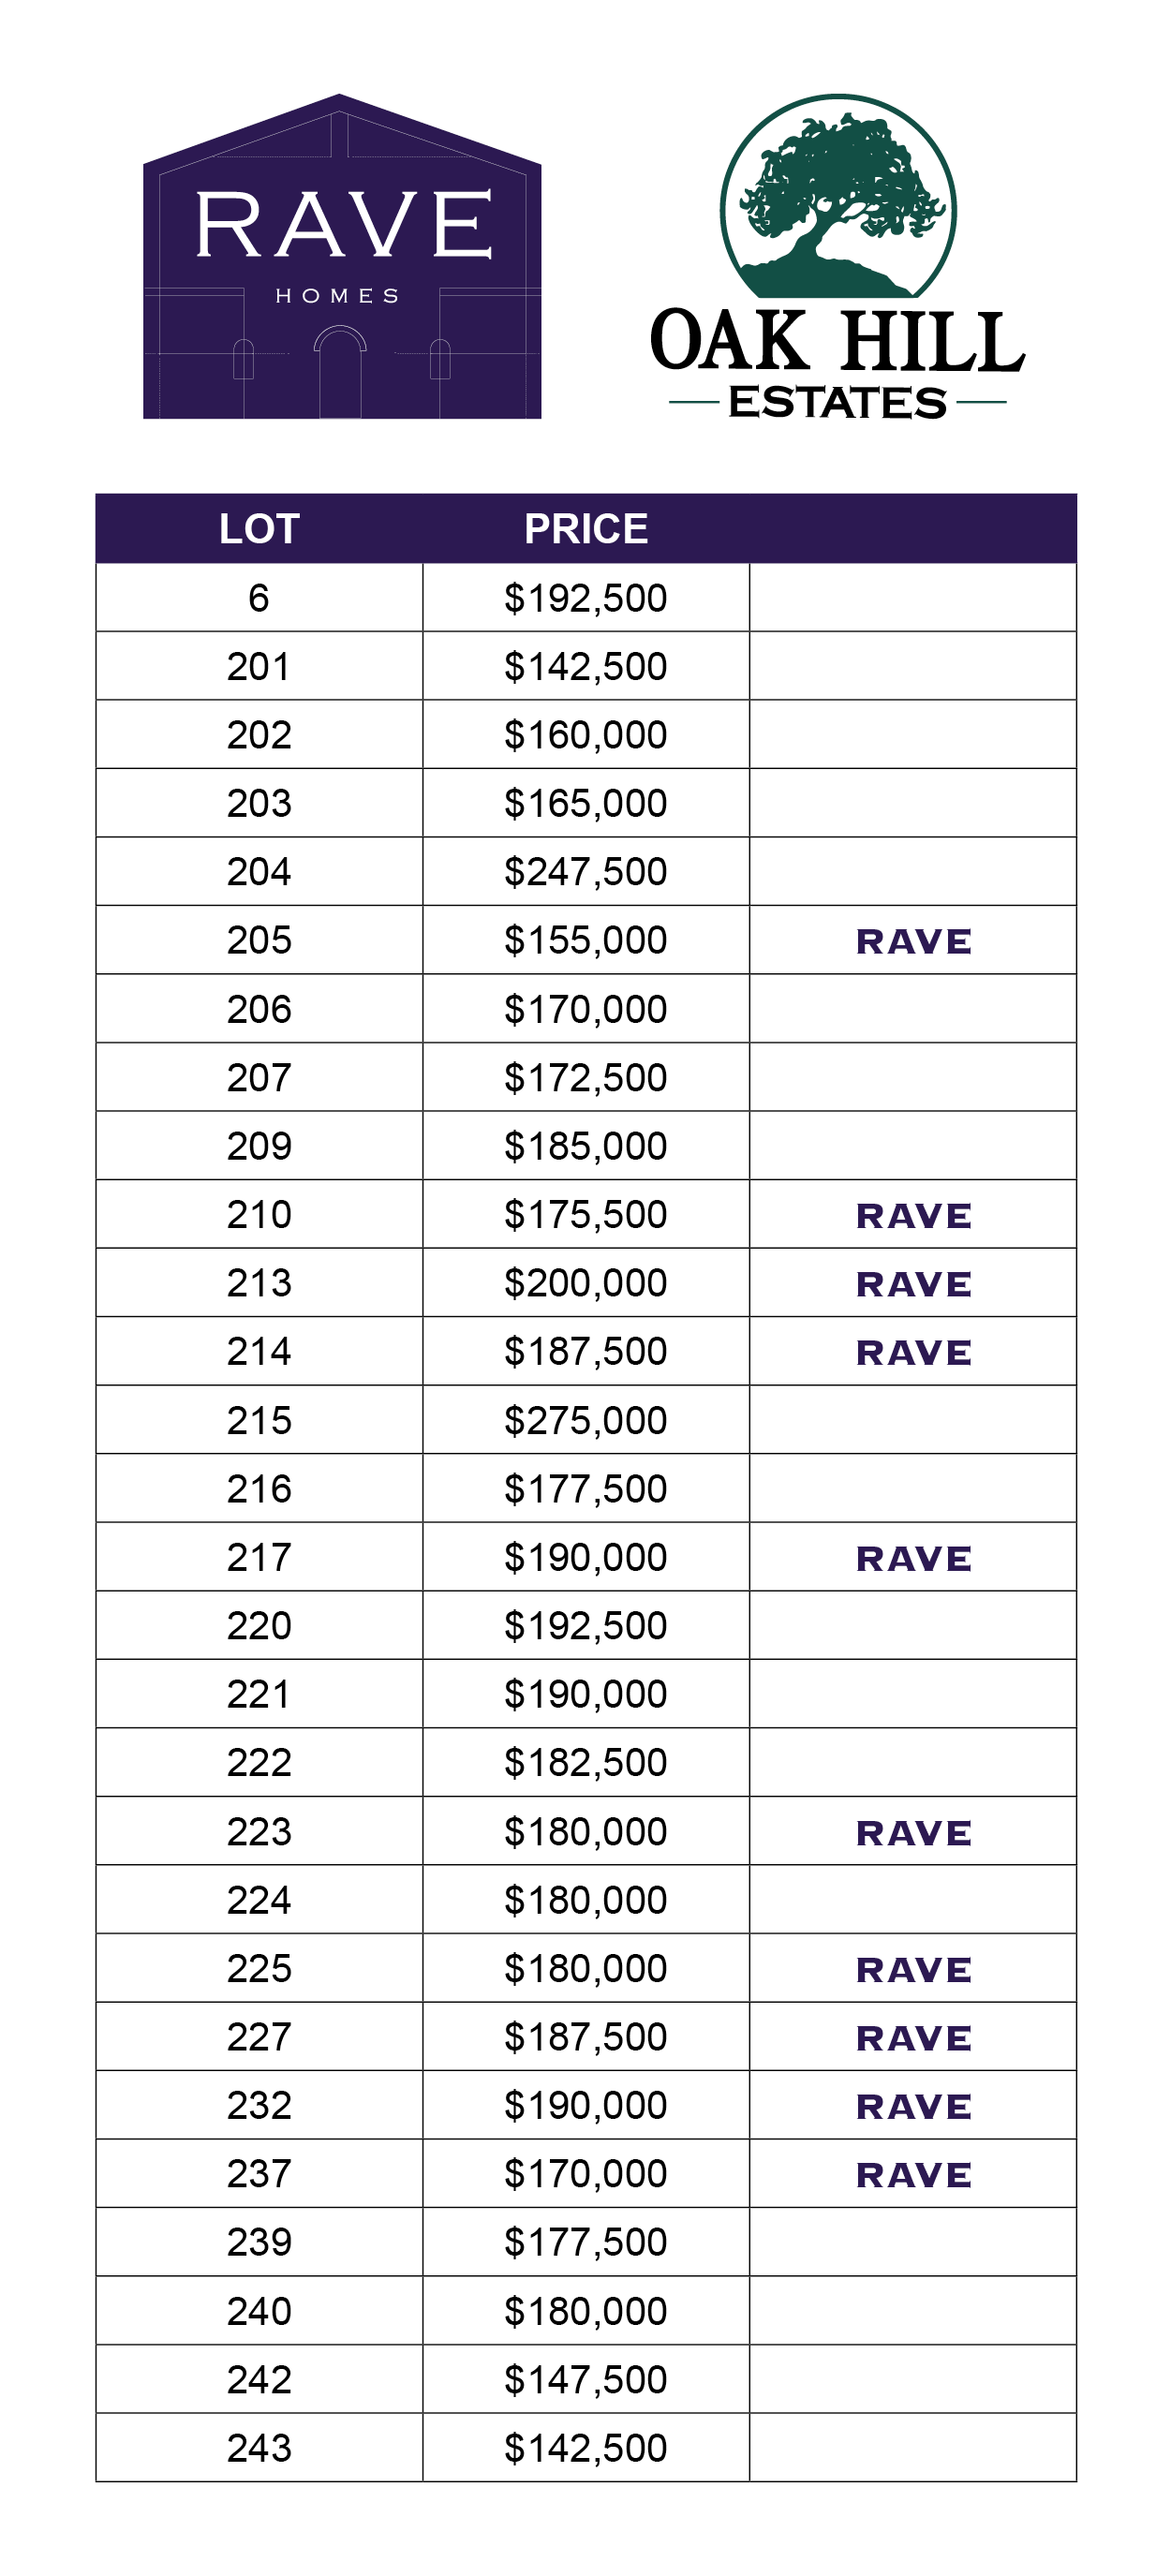 Rave Homes & Oak Hill Estate Price List: Buy Your Custom Home From Rave Homes in Columbia, MO.